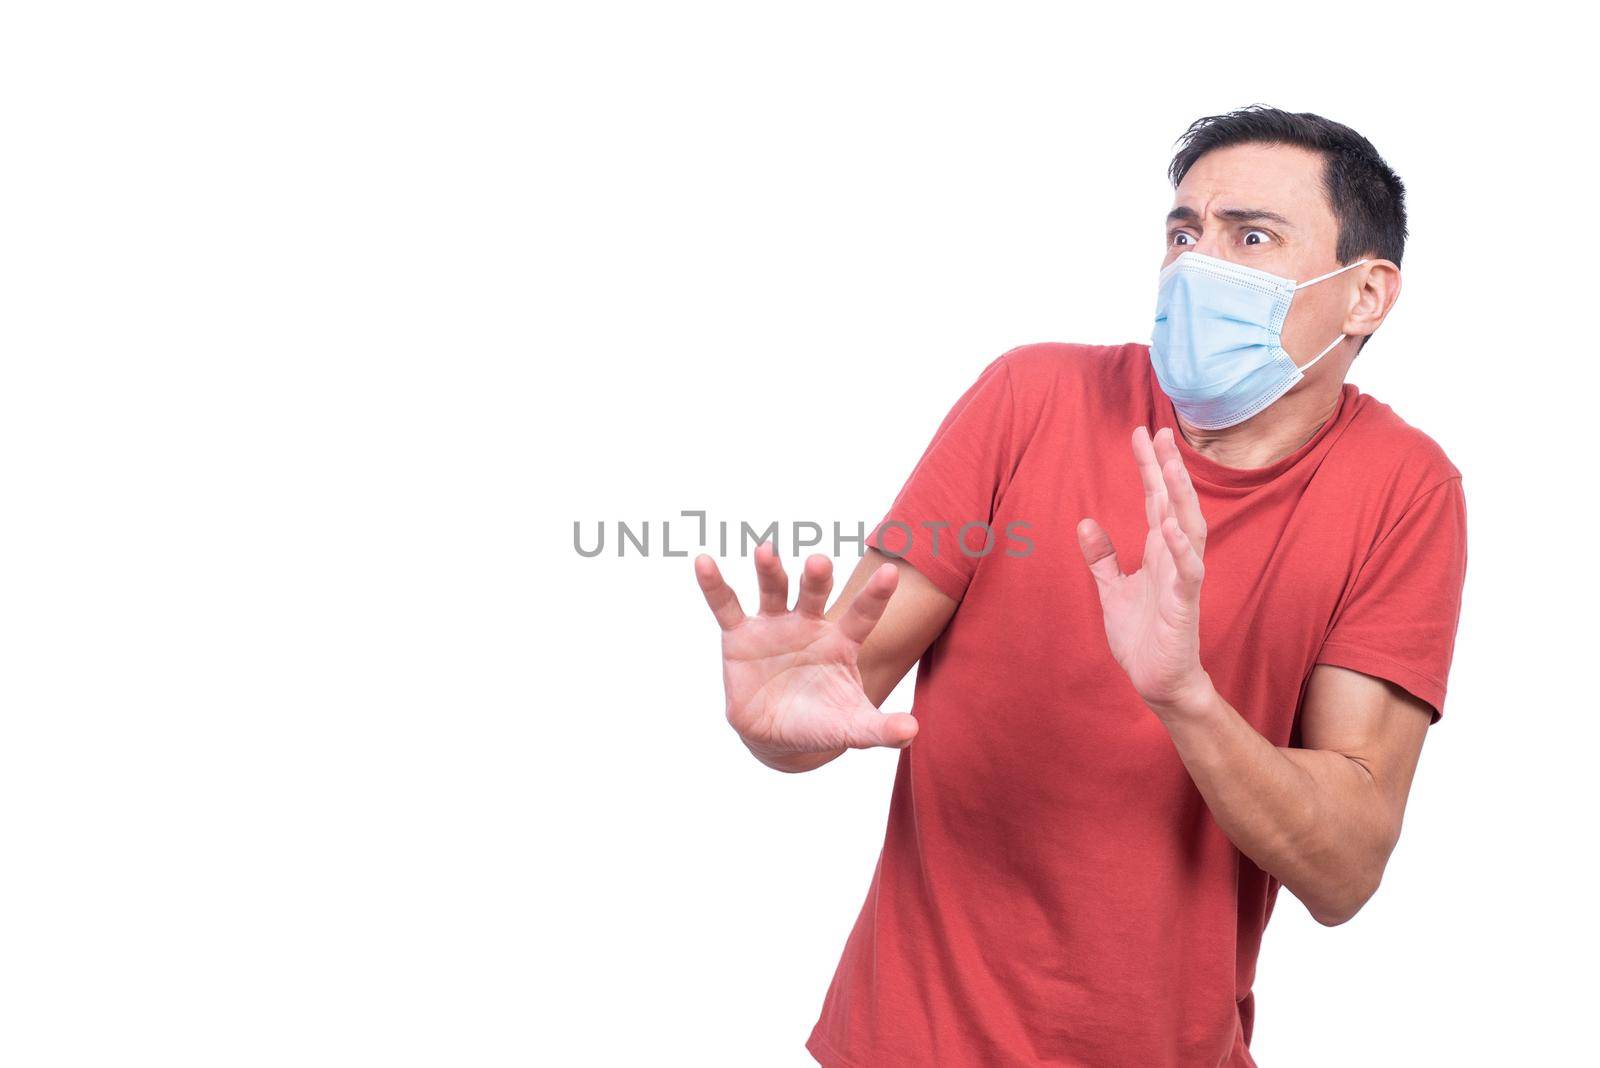 Scared man in protective mask during coronavirus pandemic by ivanmoreno